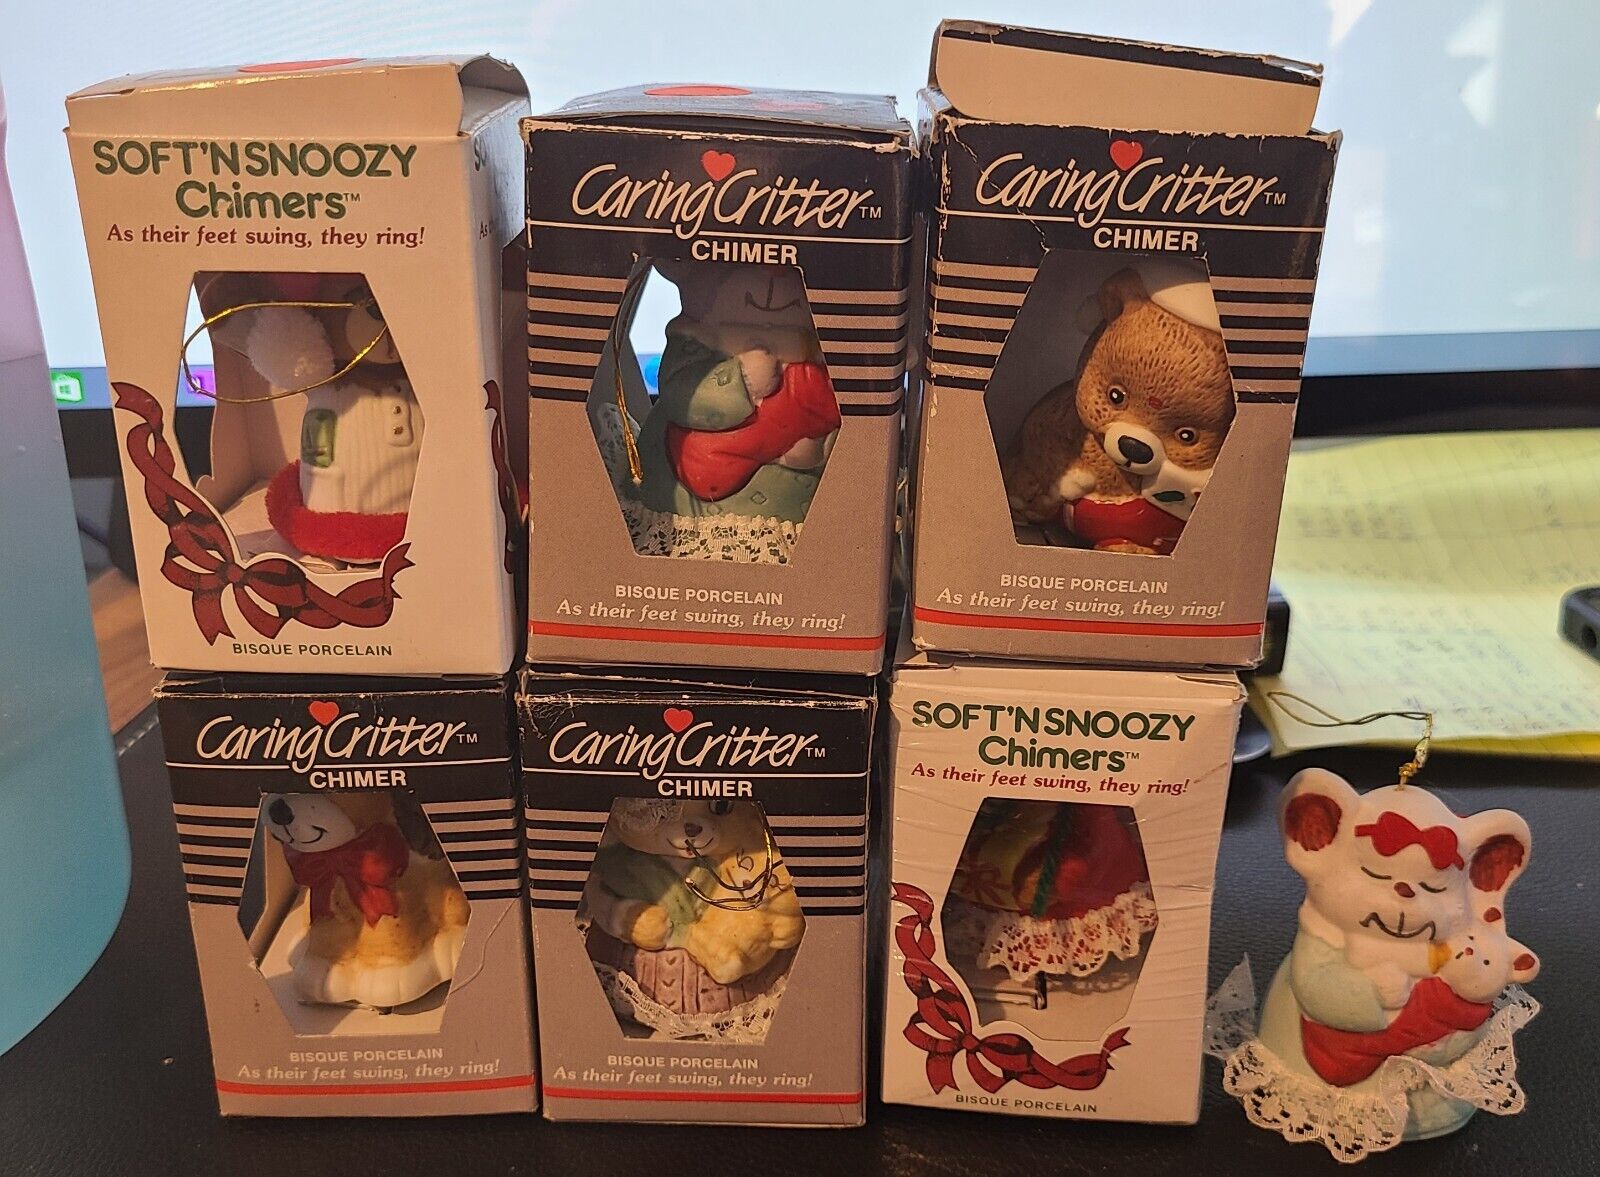 Soft\'NSnoozy and Caring Critters Chimers ornament Lot of 7pcs. 